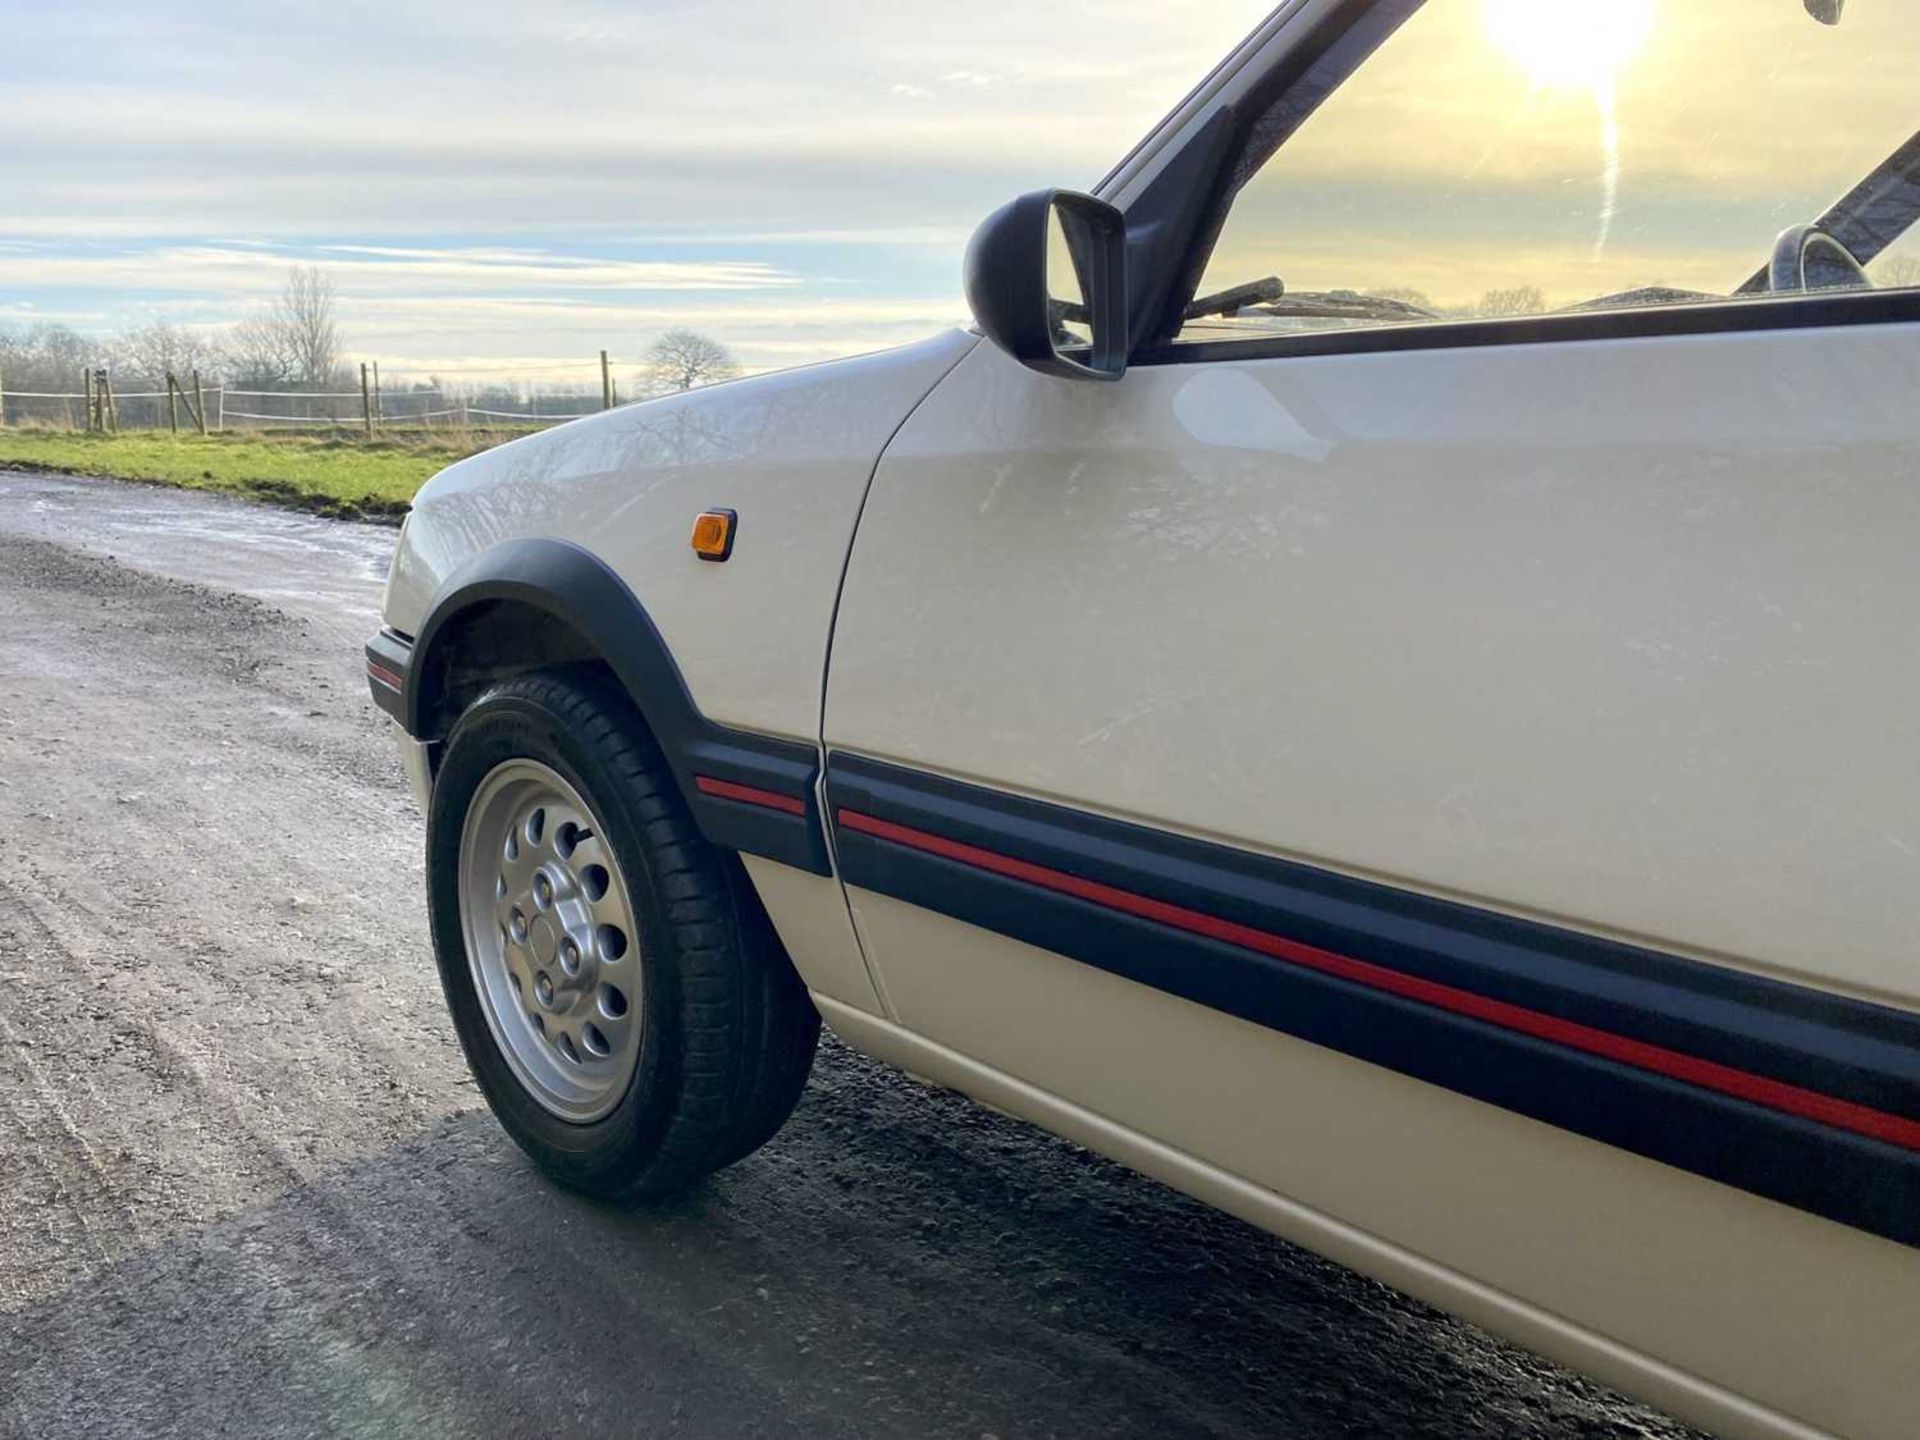 1990 Peugeot 205 GTi 1.6 Only 56,000 miles, same owner for 16 years - Image 70 of 81